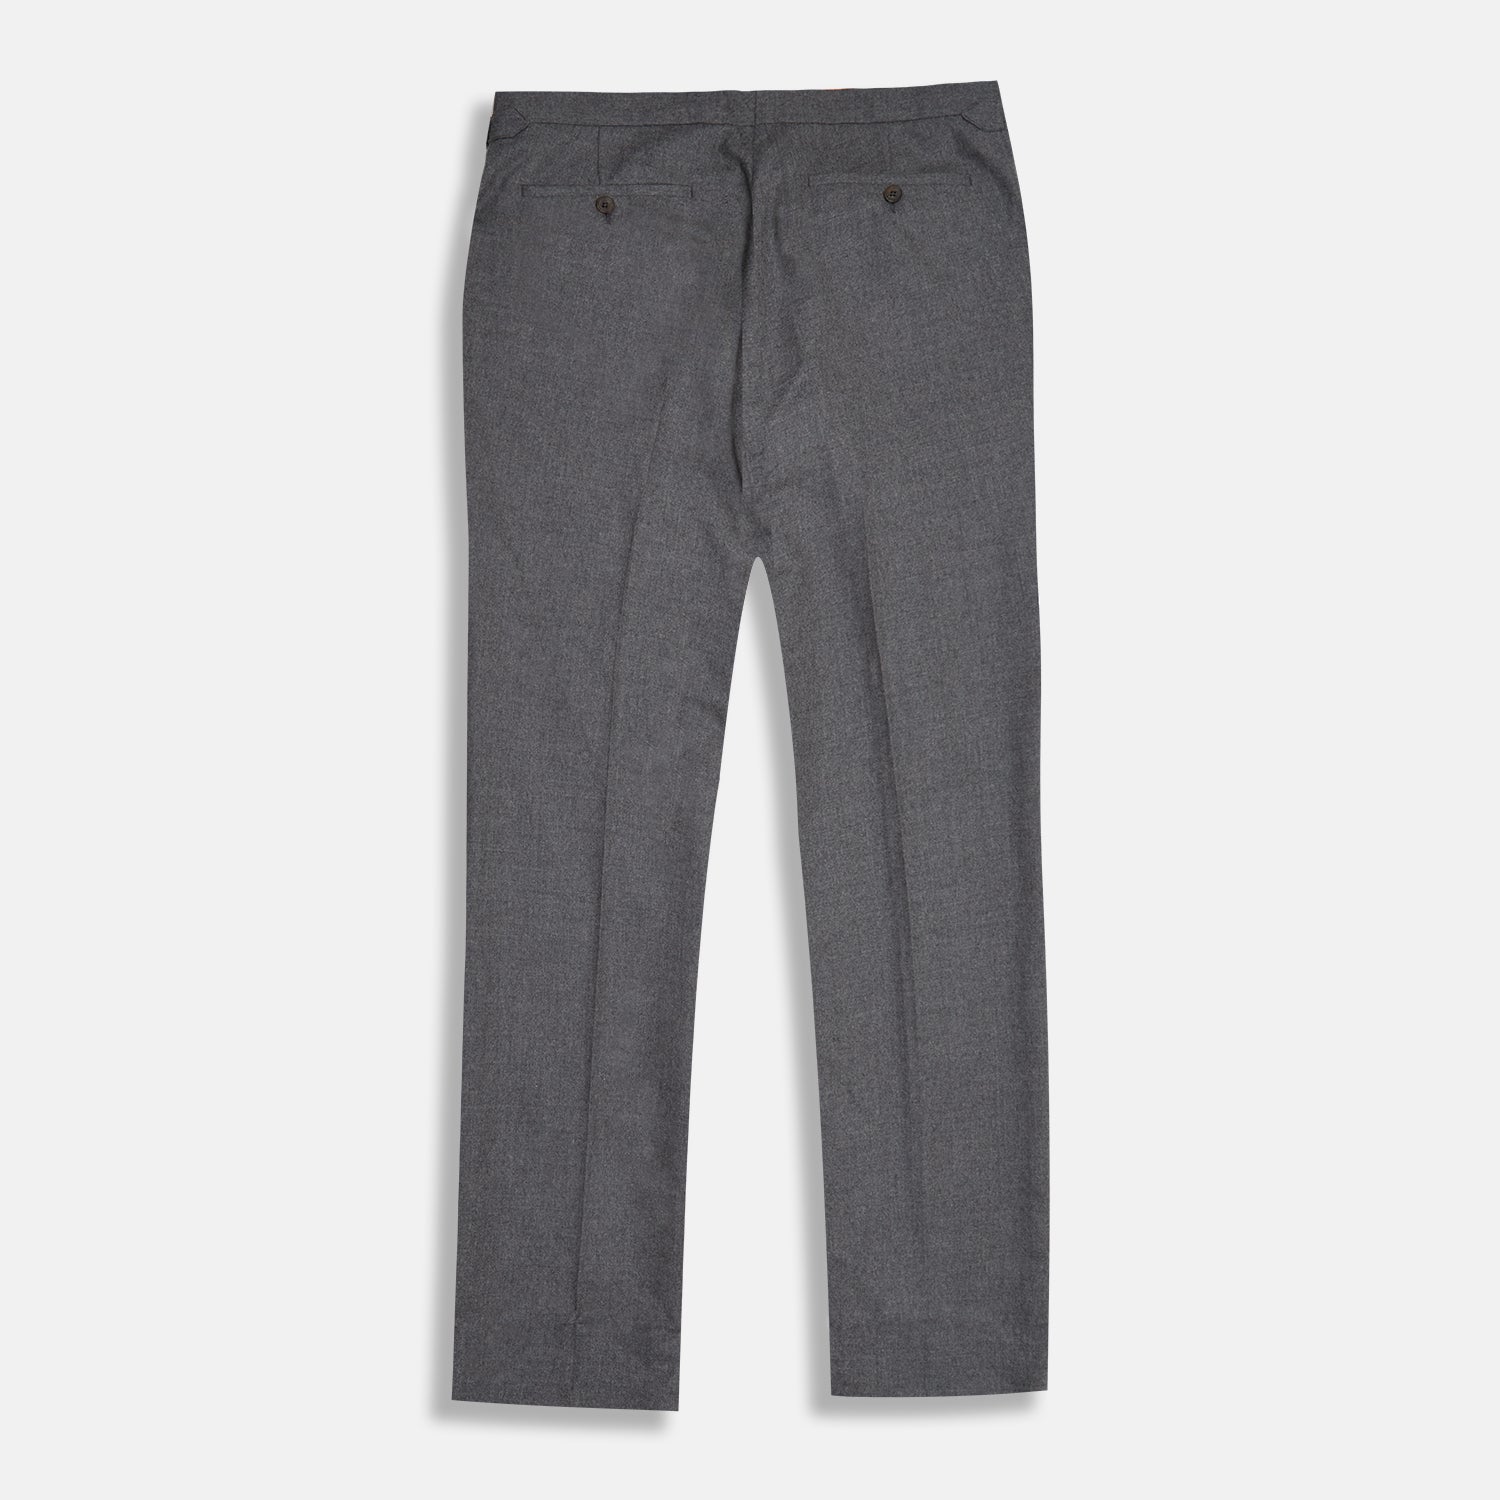 MotivMfg X DR English Convertible Trousers  Fox Brothers Grey Flannel  Tweed Twill  Division Road Inc